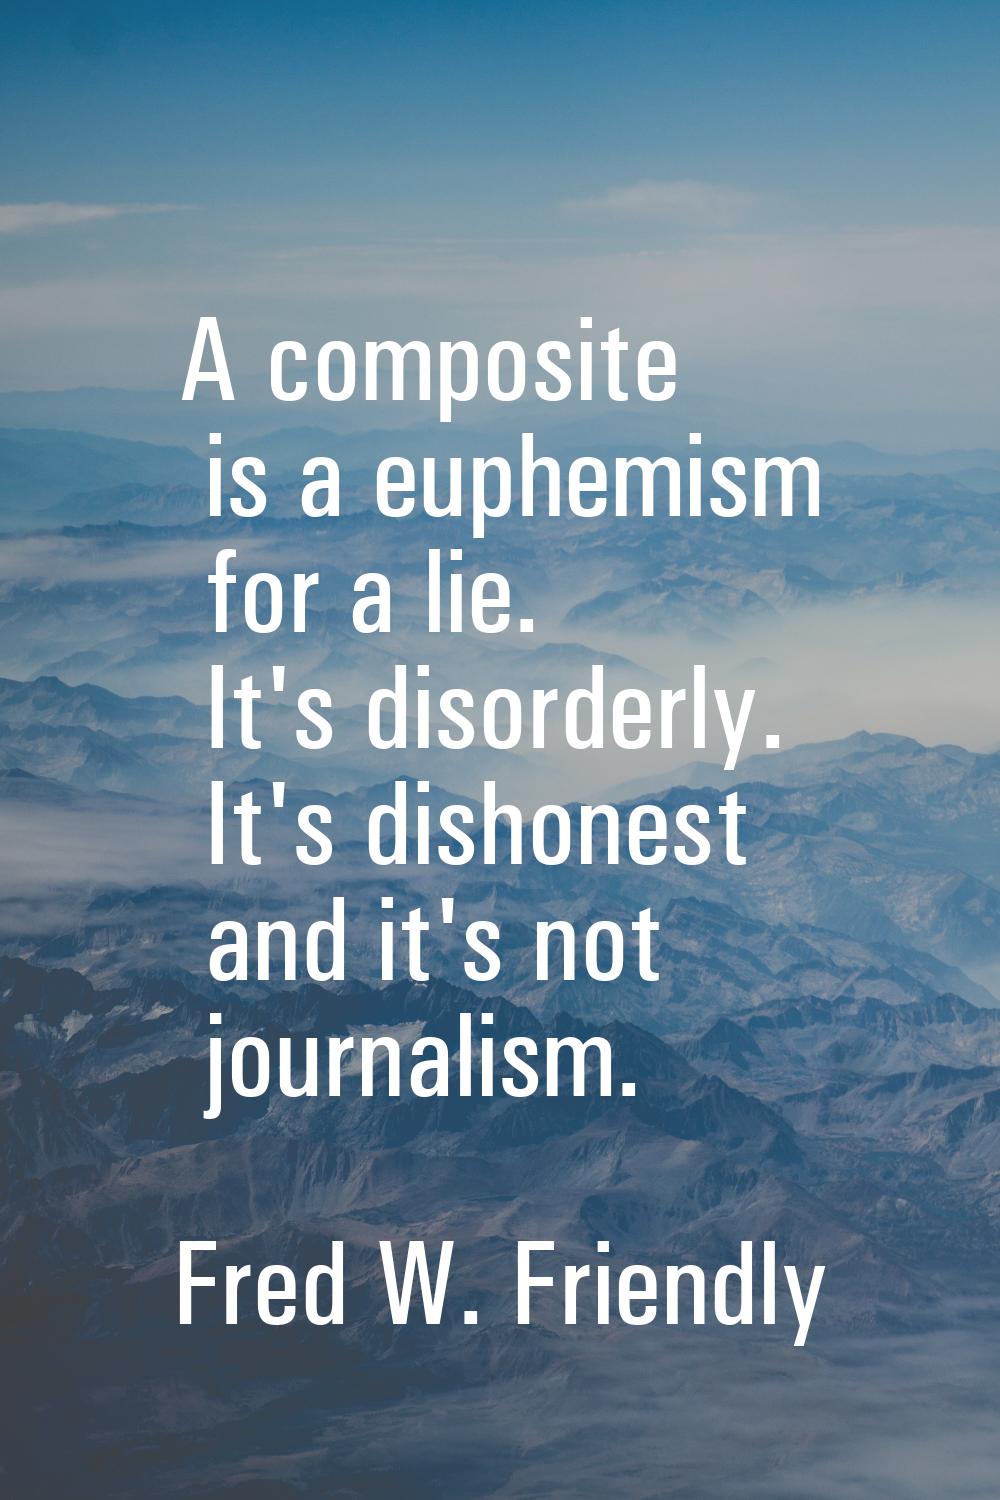 A composite is a euphemism for a lie. It's disorderly. It's dishonest and it's not journalism.